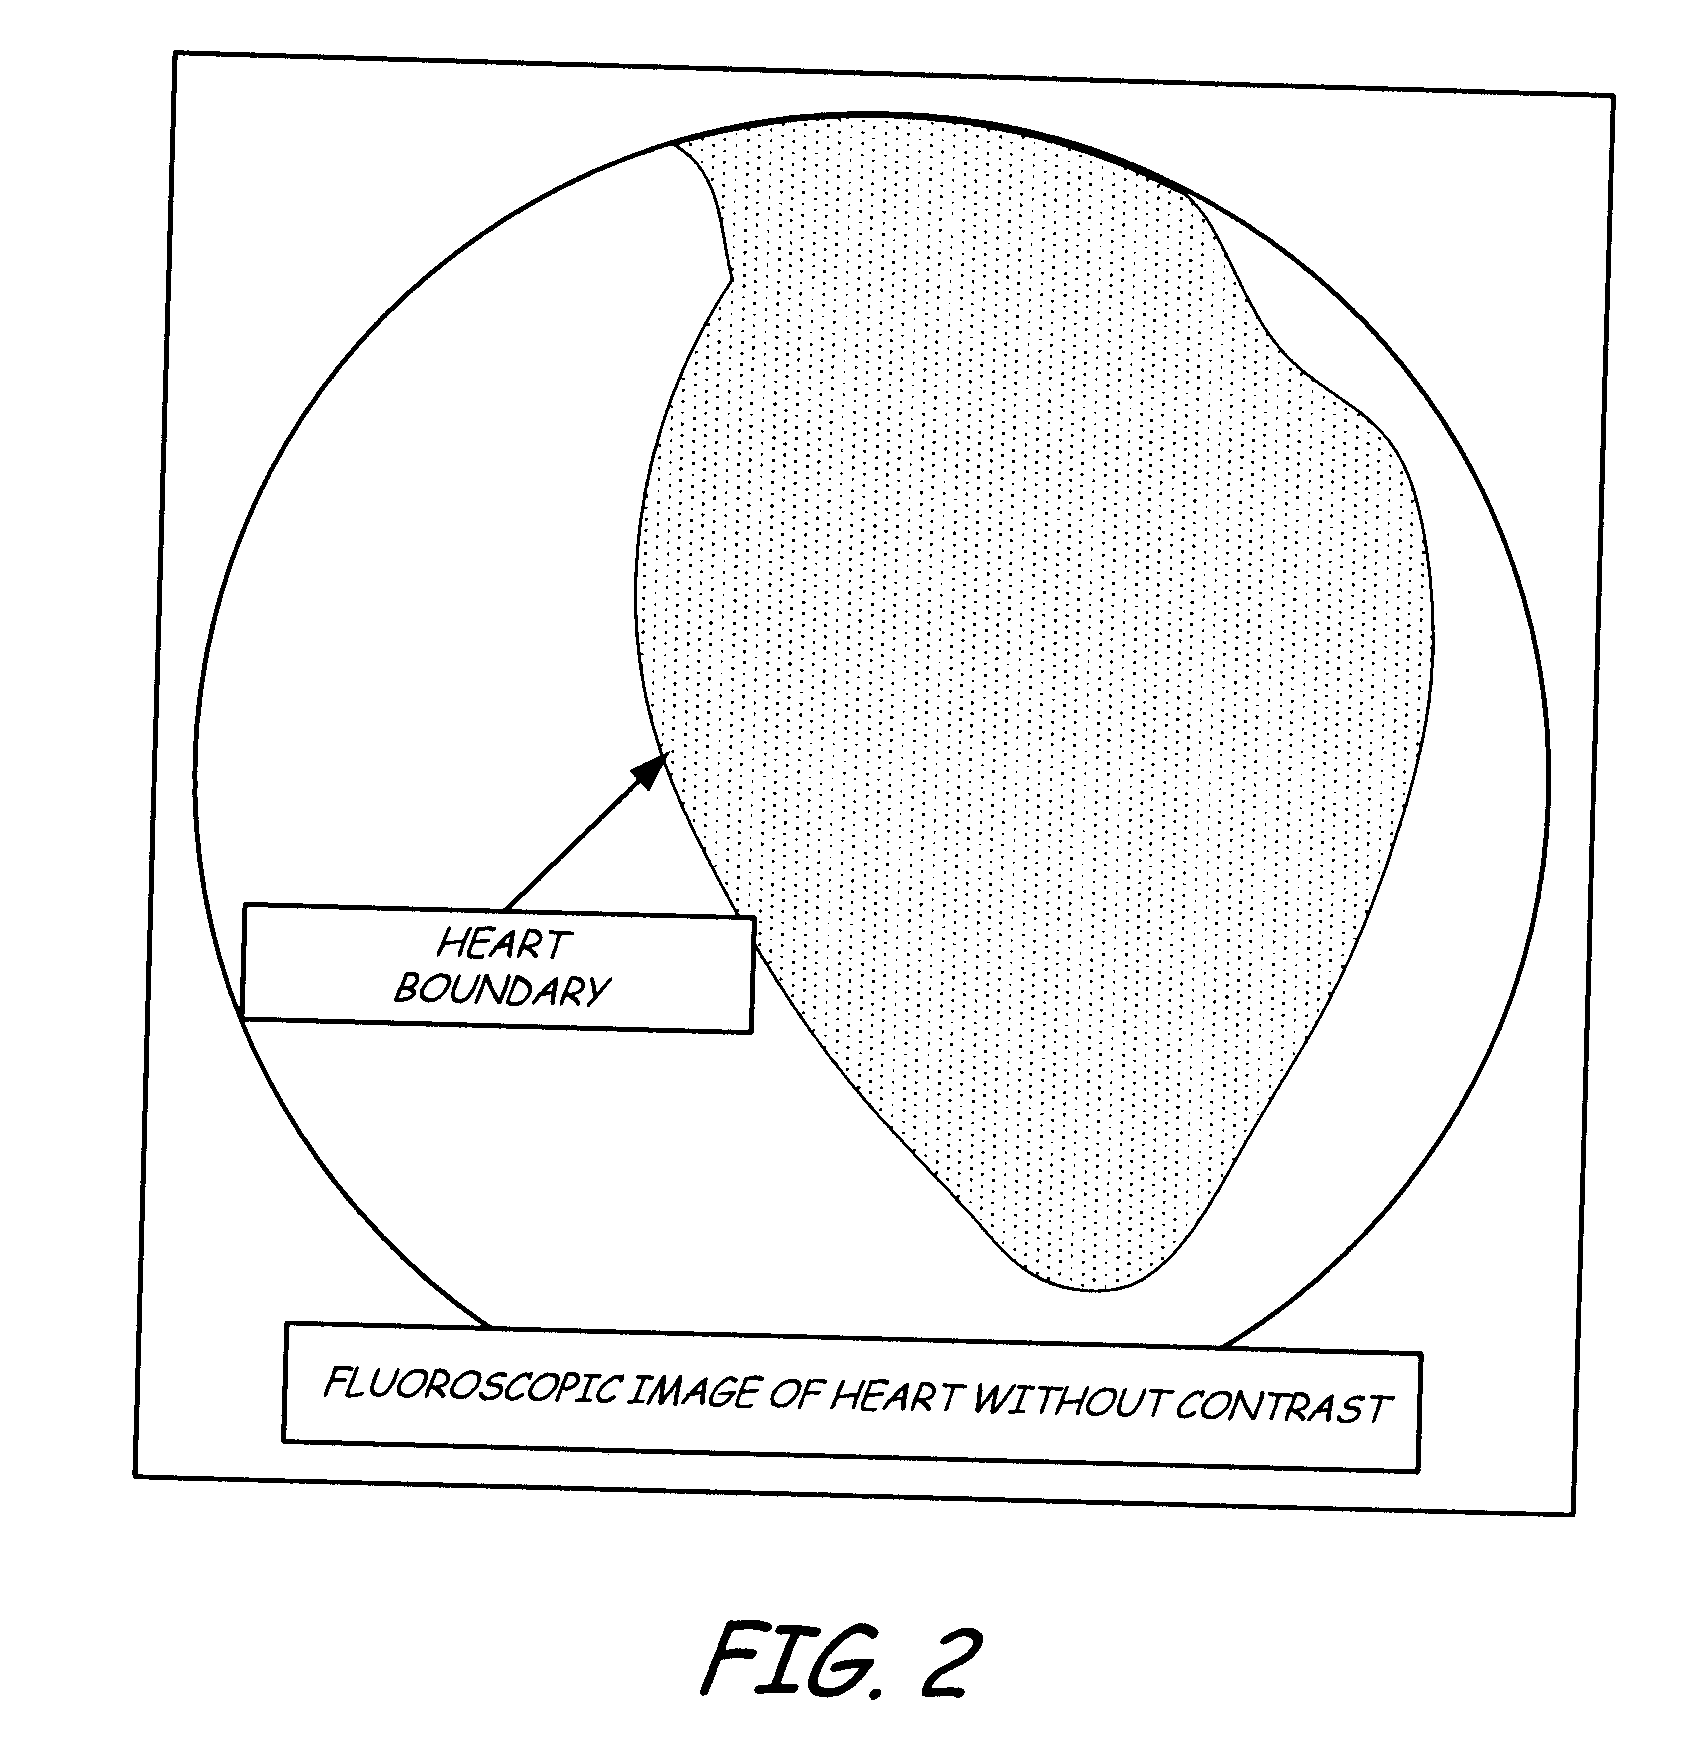 Pericardial space imaging for cardiac support device implantation